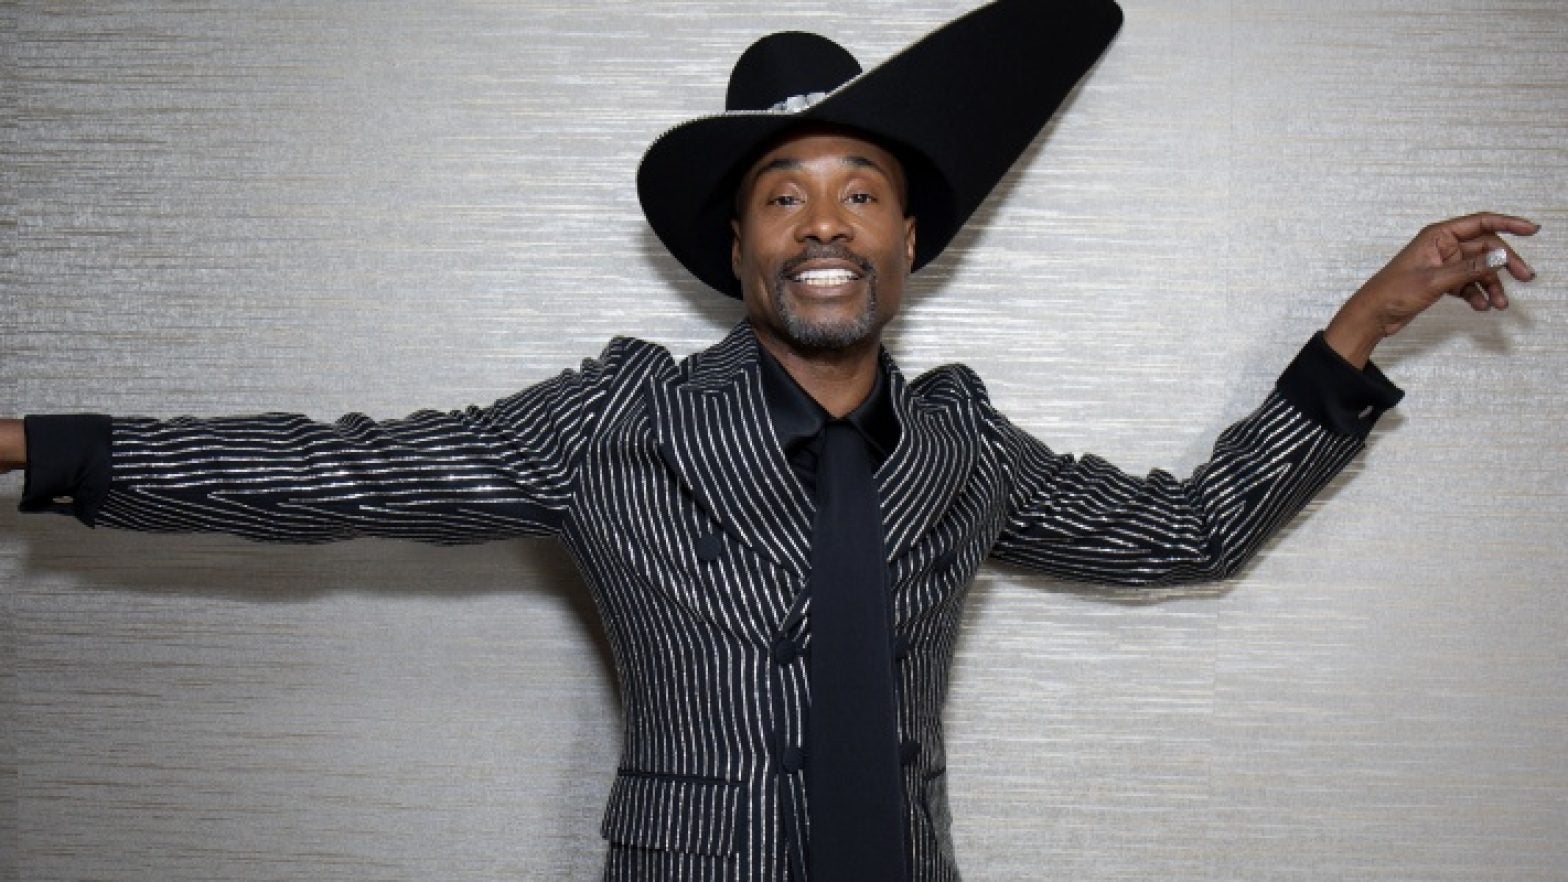 Billy Porter And Other Famous Black Men Who Have Embraced Gender-Fluid Fashions